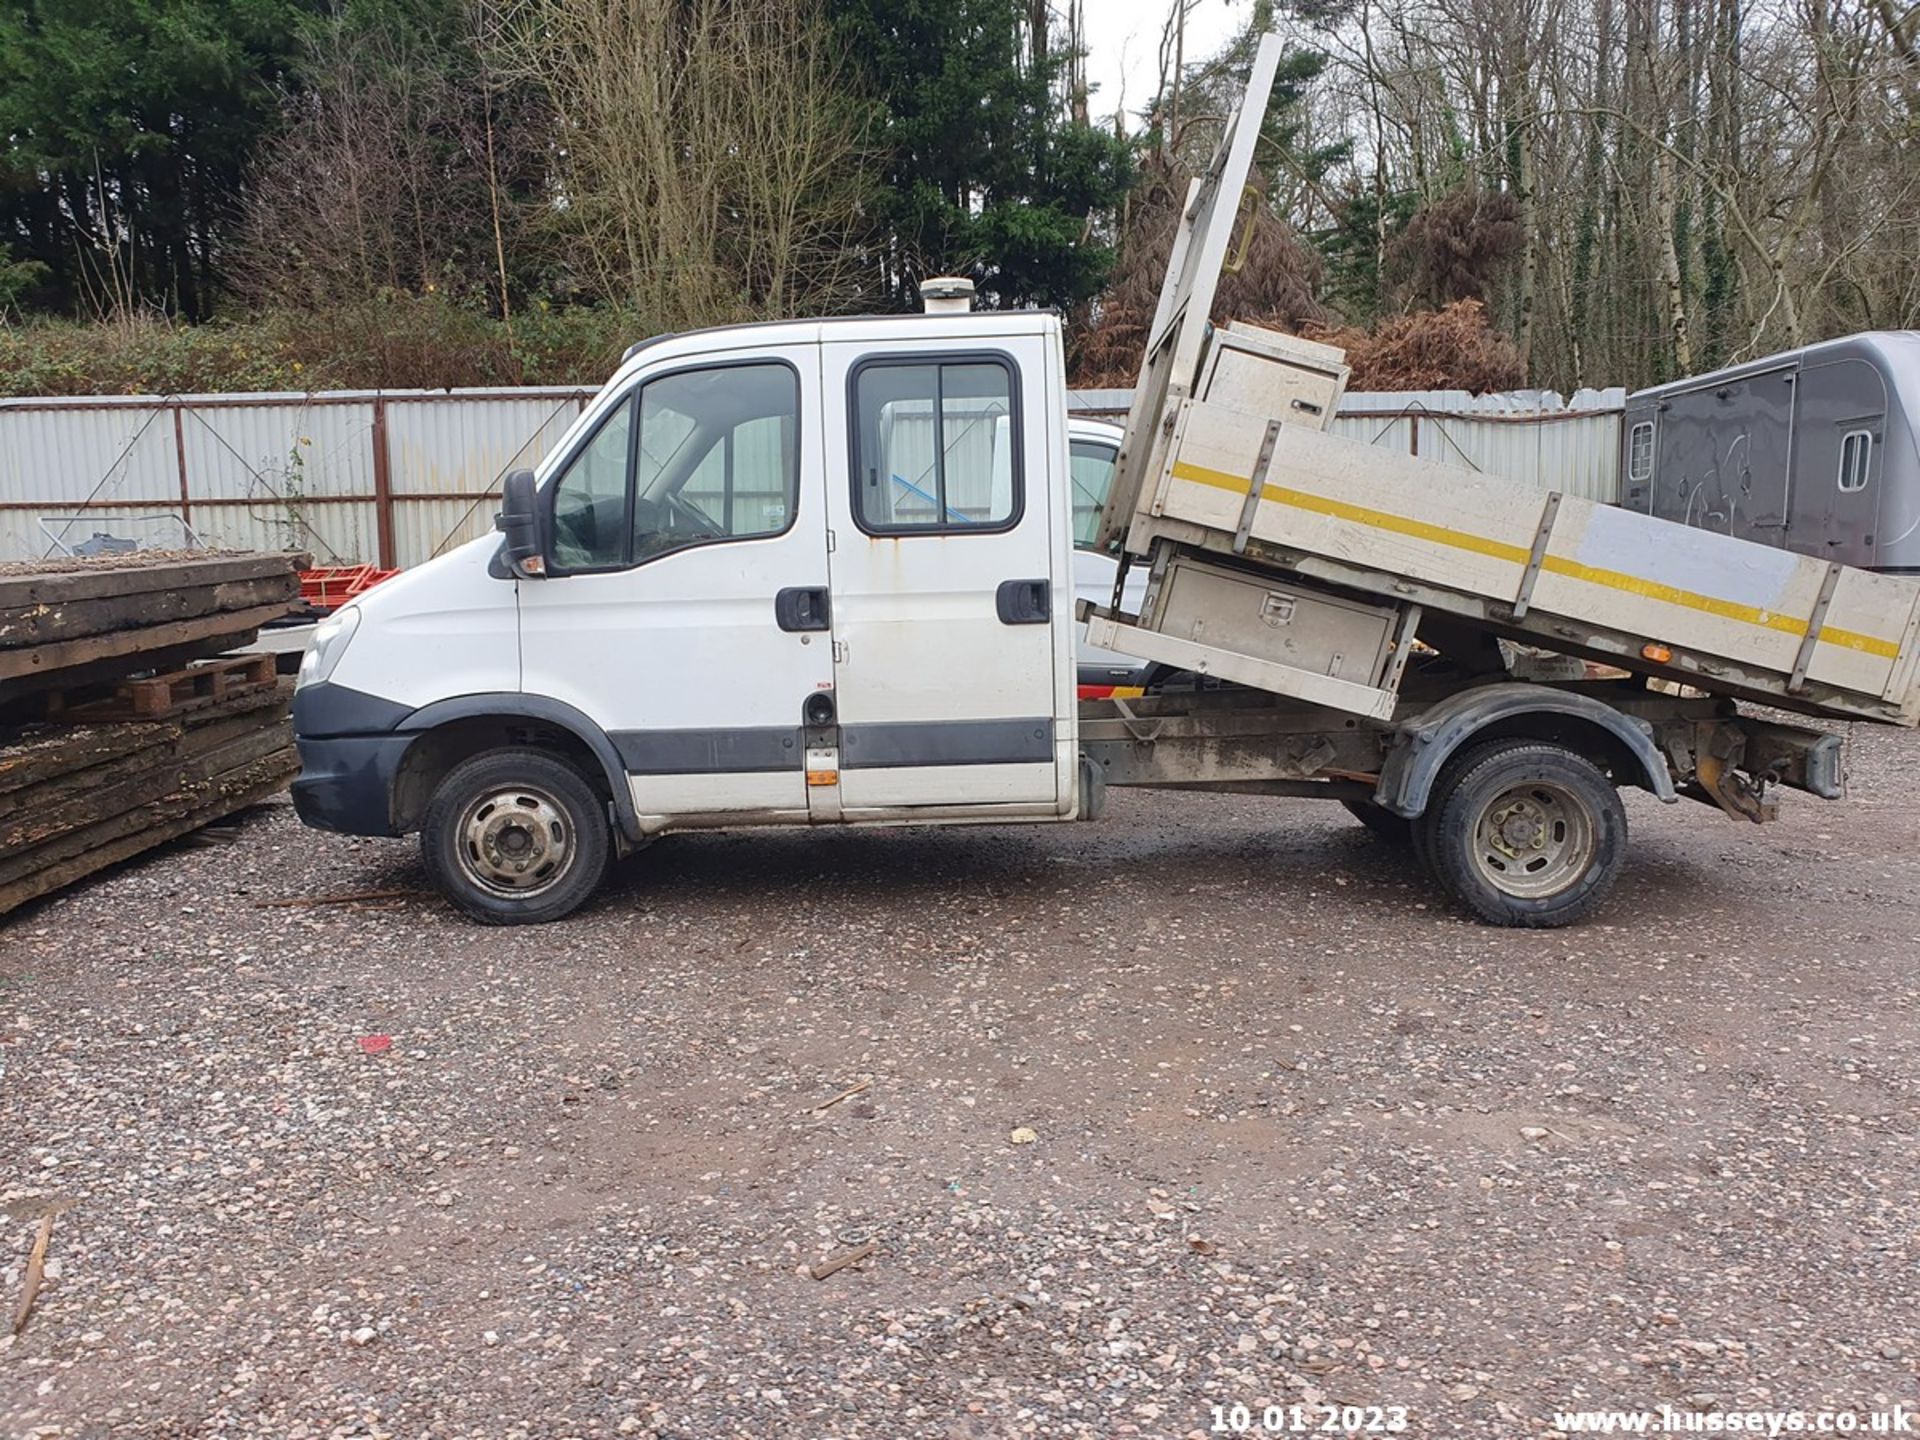 14/64 IVECO DAILY 50C15 - 2998cc 4dr Tipper (White, 108k) - Image 20 of 26